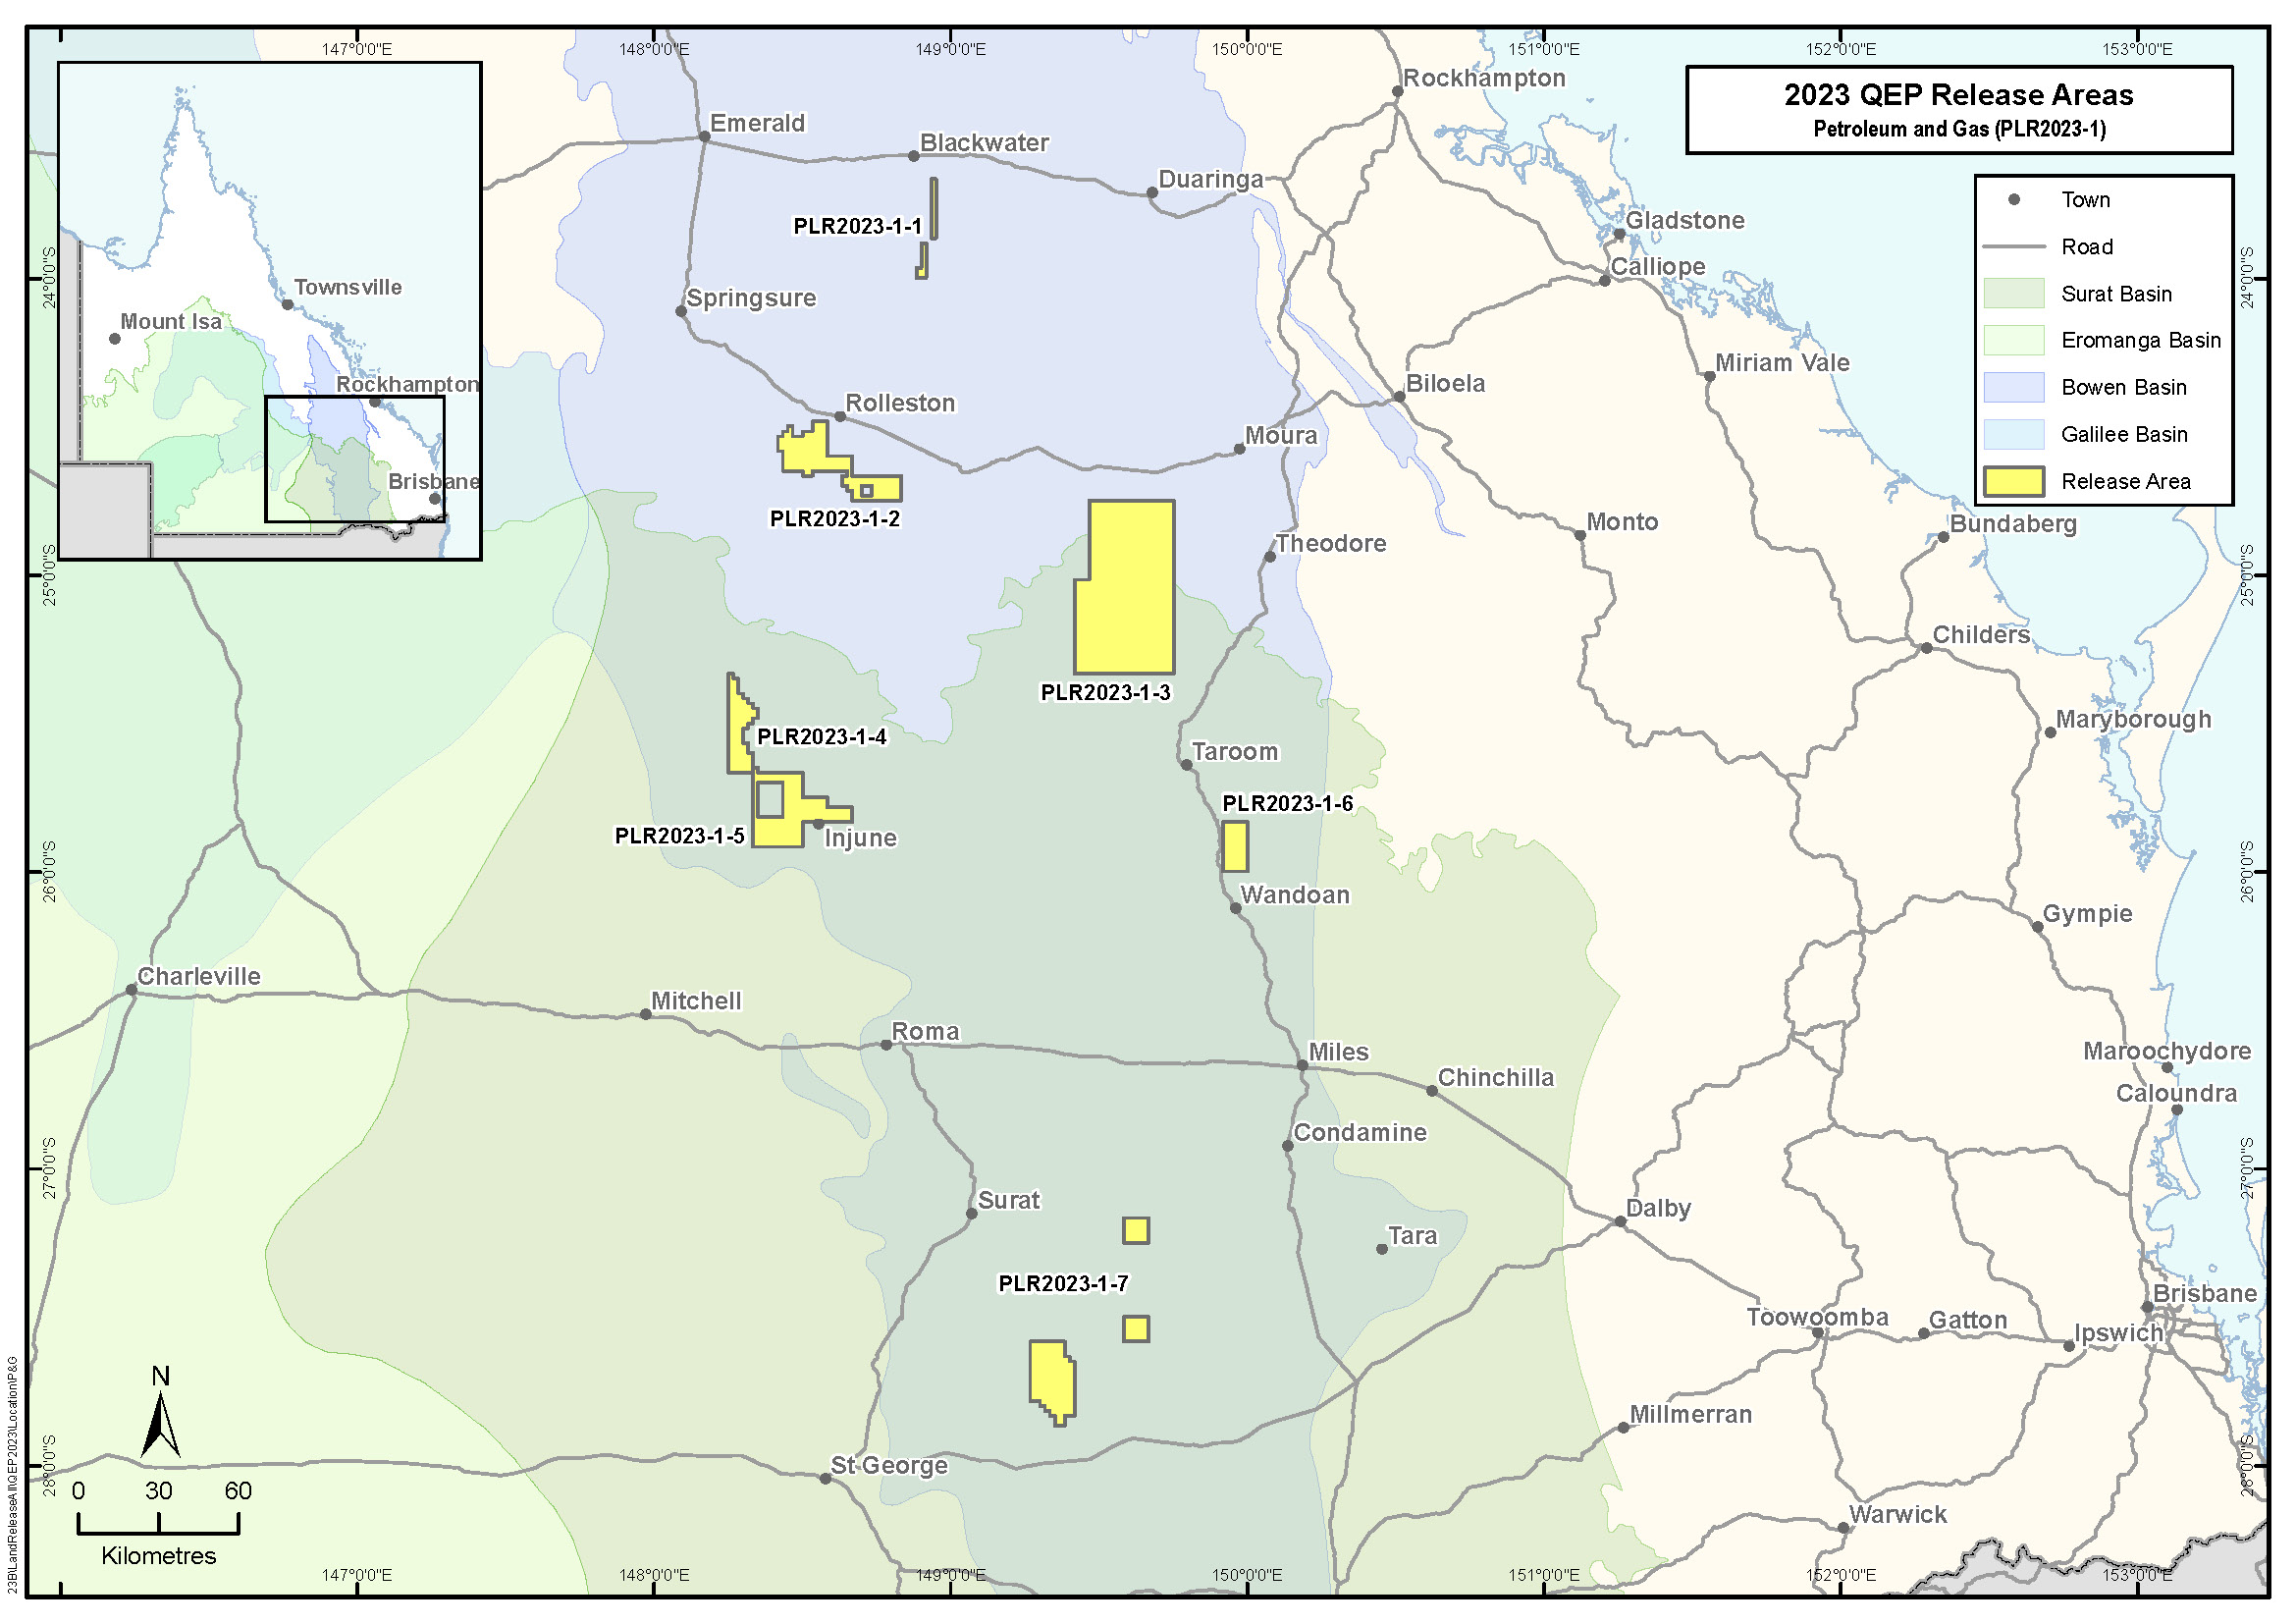 Map of Queensland showing the 2023 QEP Release areas for Petroleum and Gas